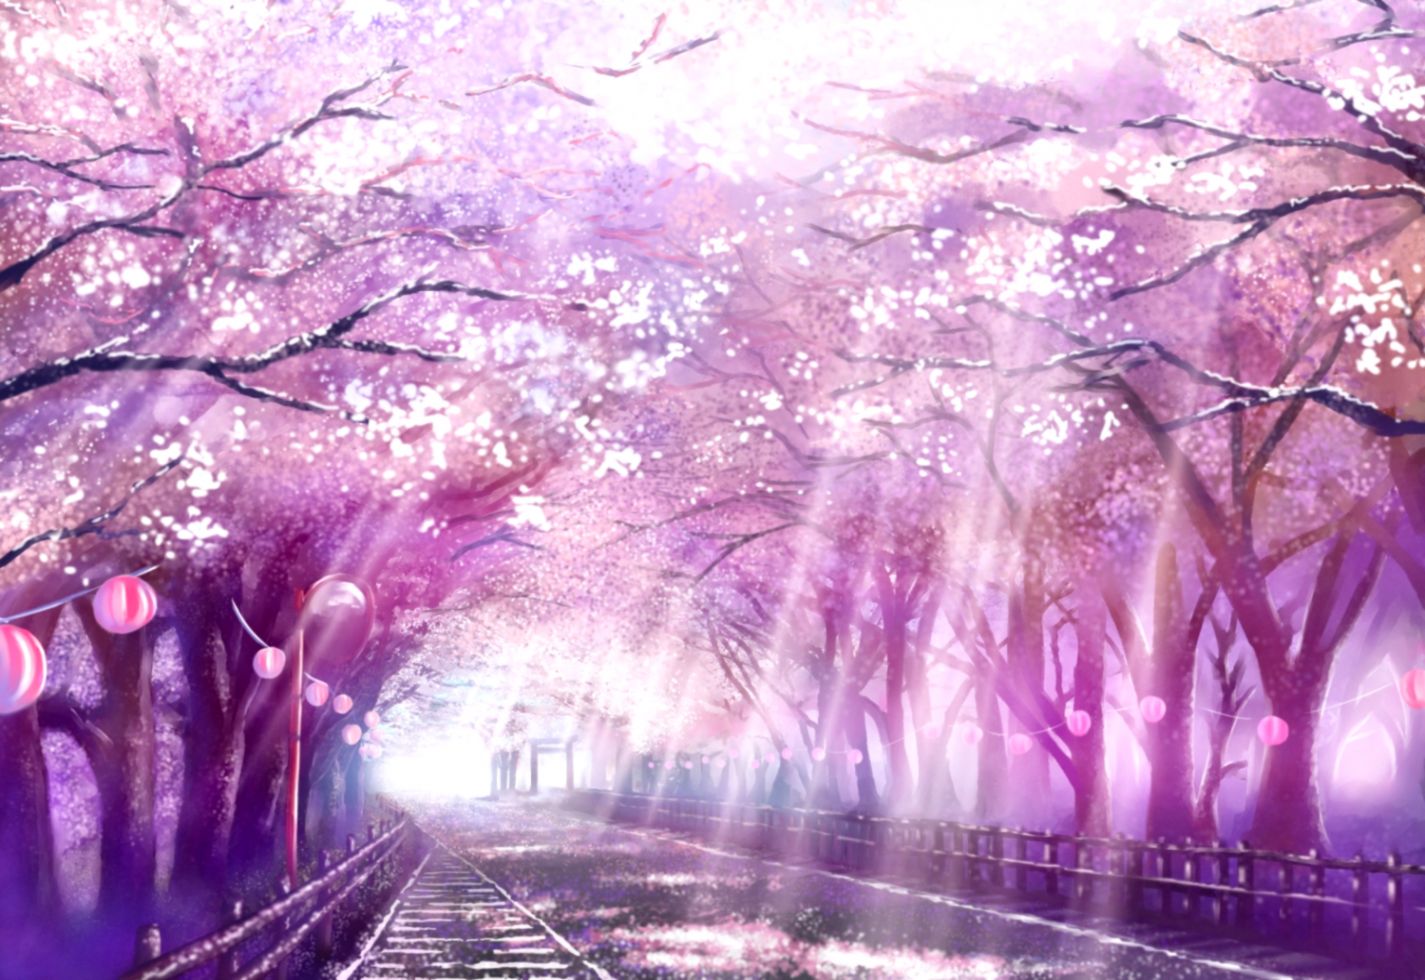 Cherry Blossom Tree Wallpaper Best Wallpapers Hd Gallery